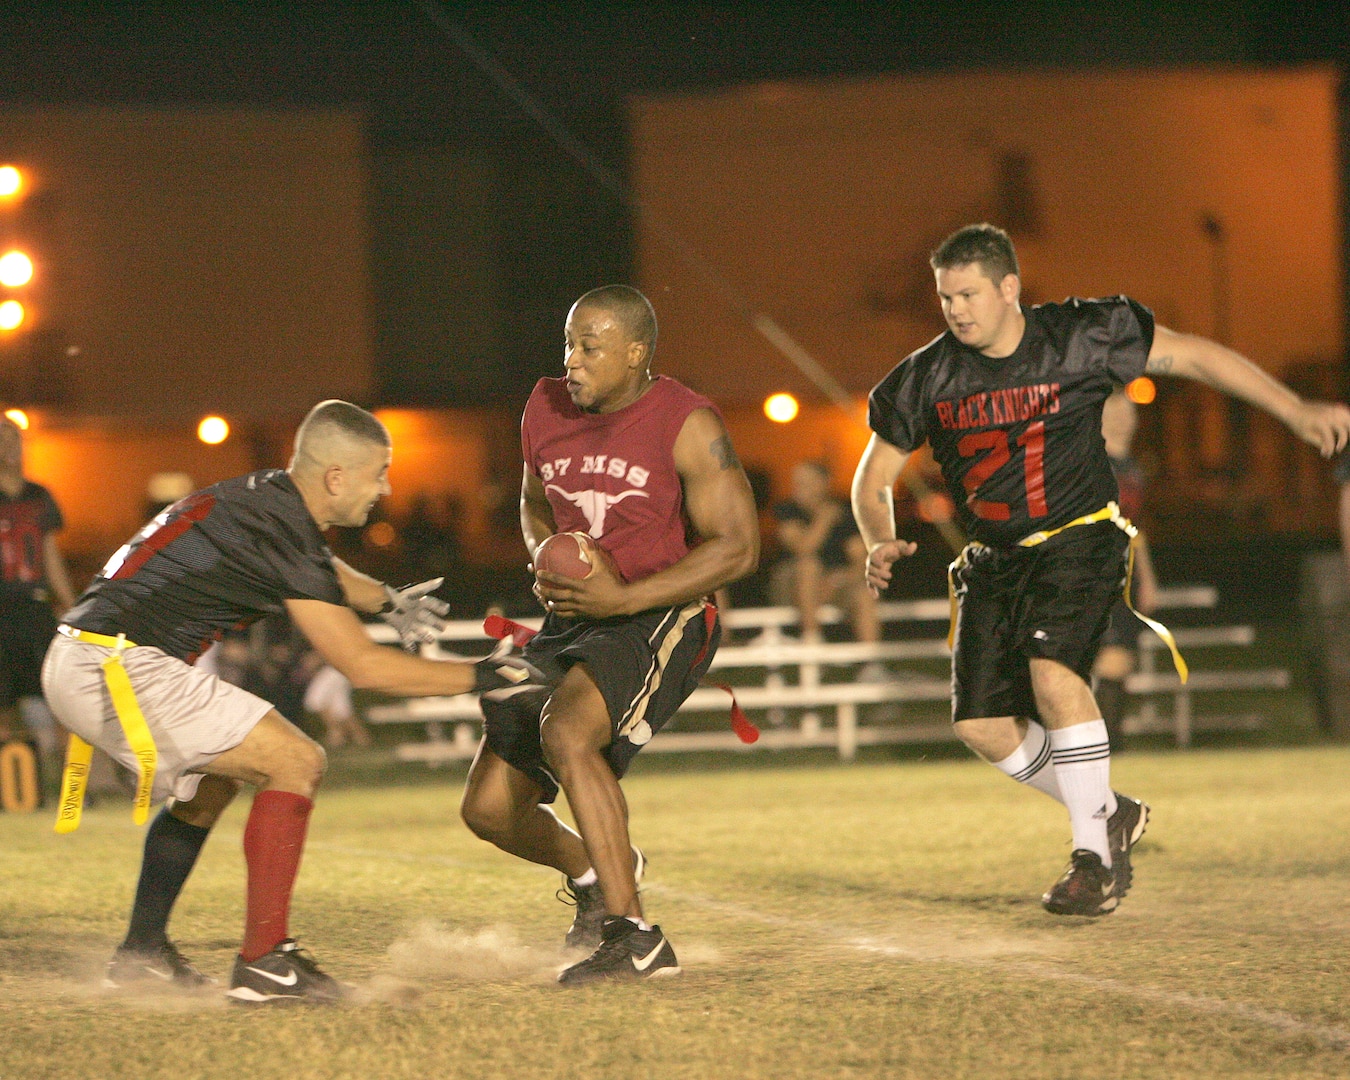 37th Mission Support Squadron receiver Shad Clark tries to evade two defenders from the 93rd Intelligence Squadron in the Sept. 24, 2007 game at Lackland Air Force Base, Texas. (USAF photo by Robbin Cresswell)